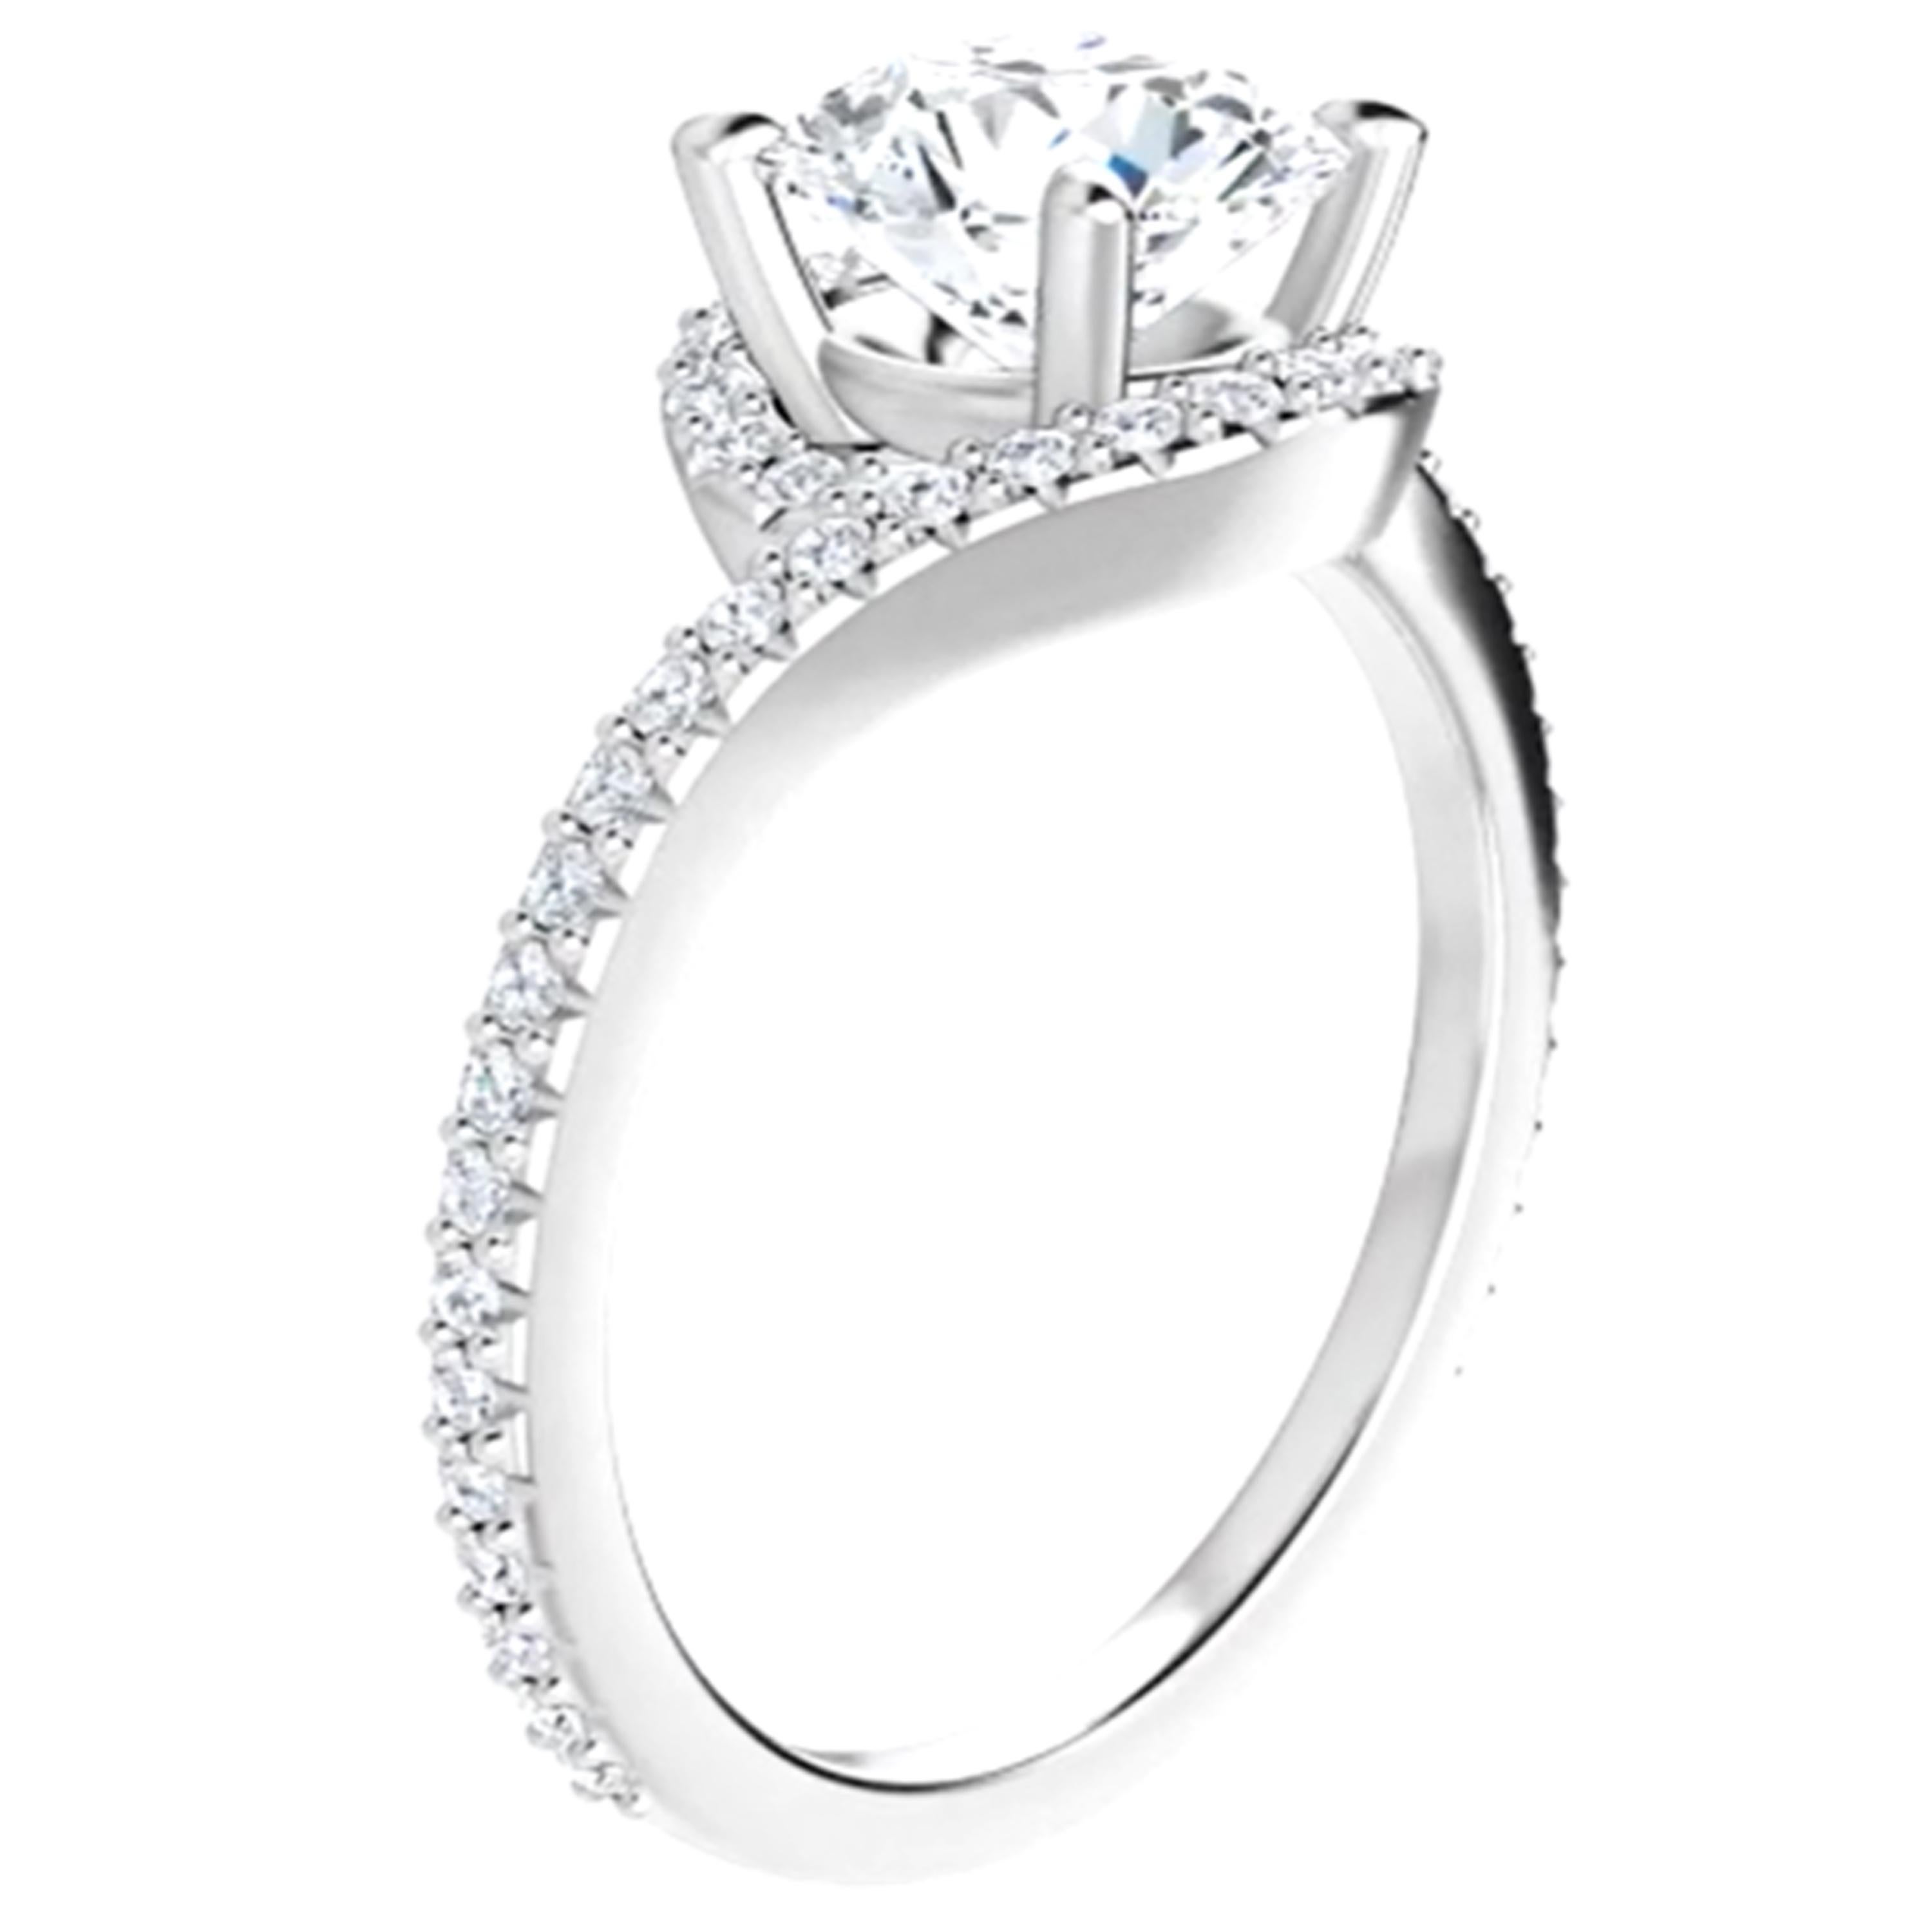 Women's Swirl Bypass Halo GIA Round Brilliant White Diamond Engagement Ring 1.27 Carats For Sale